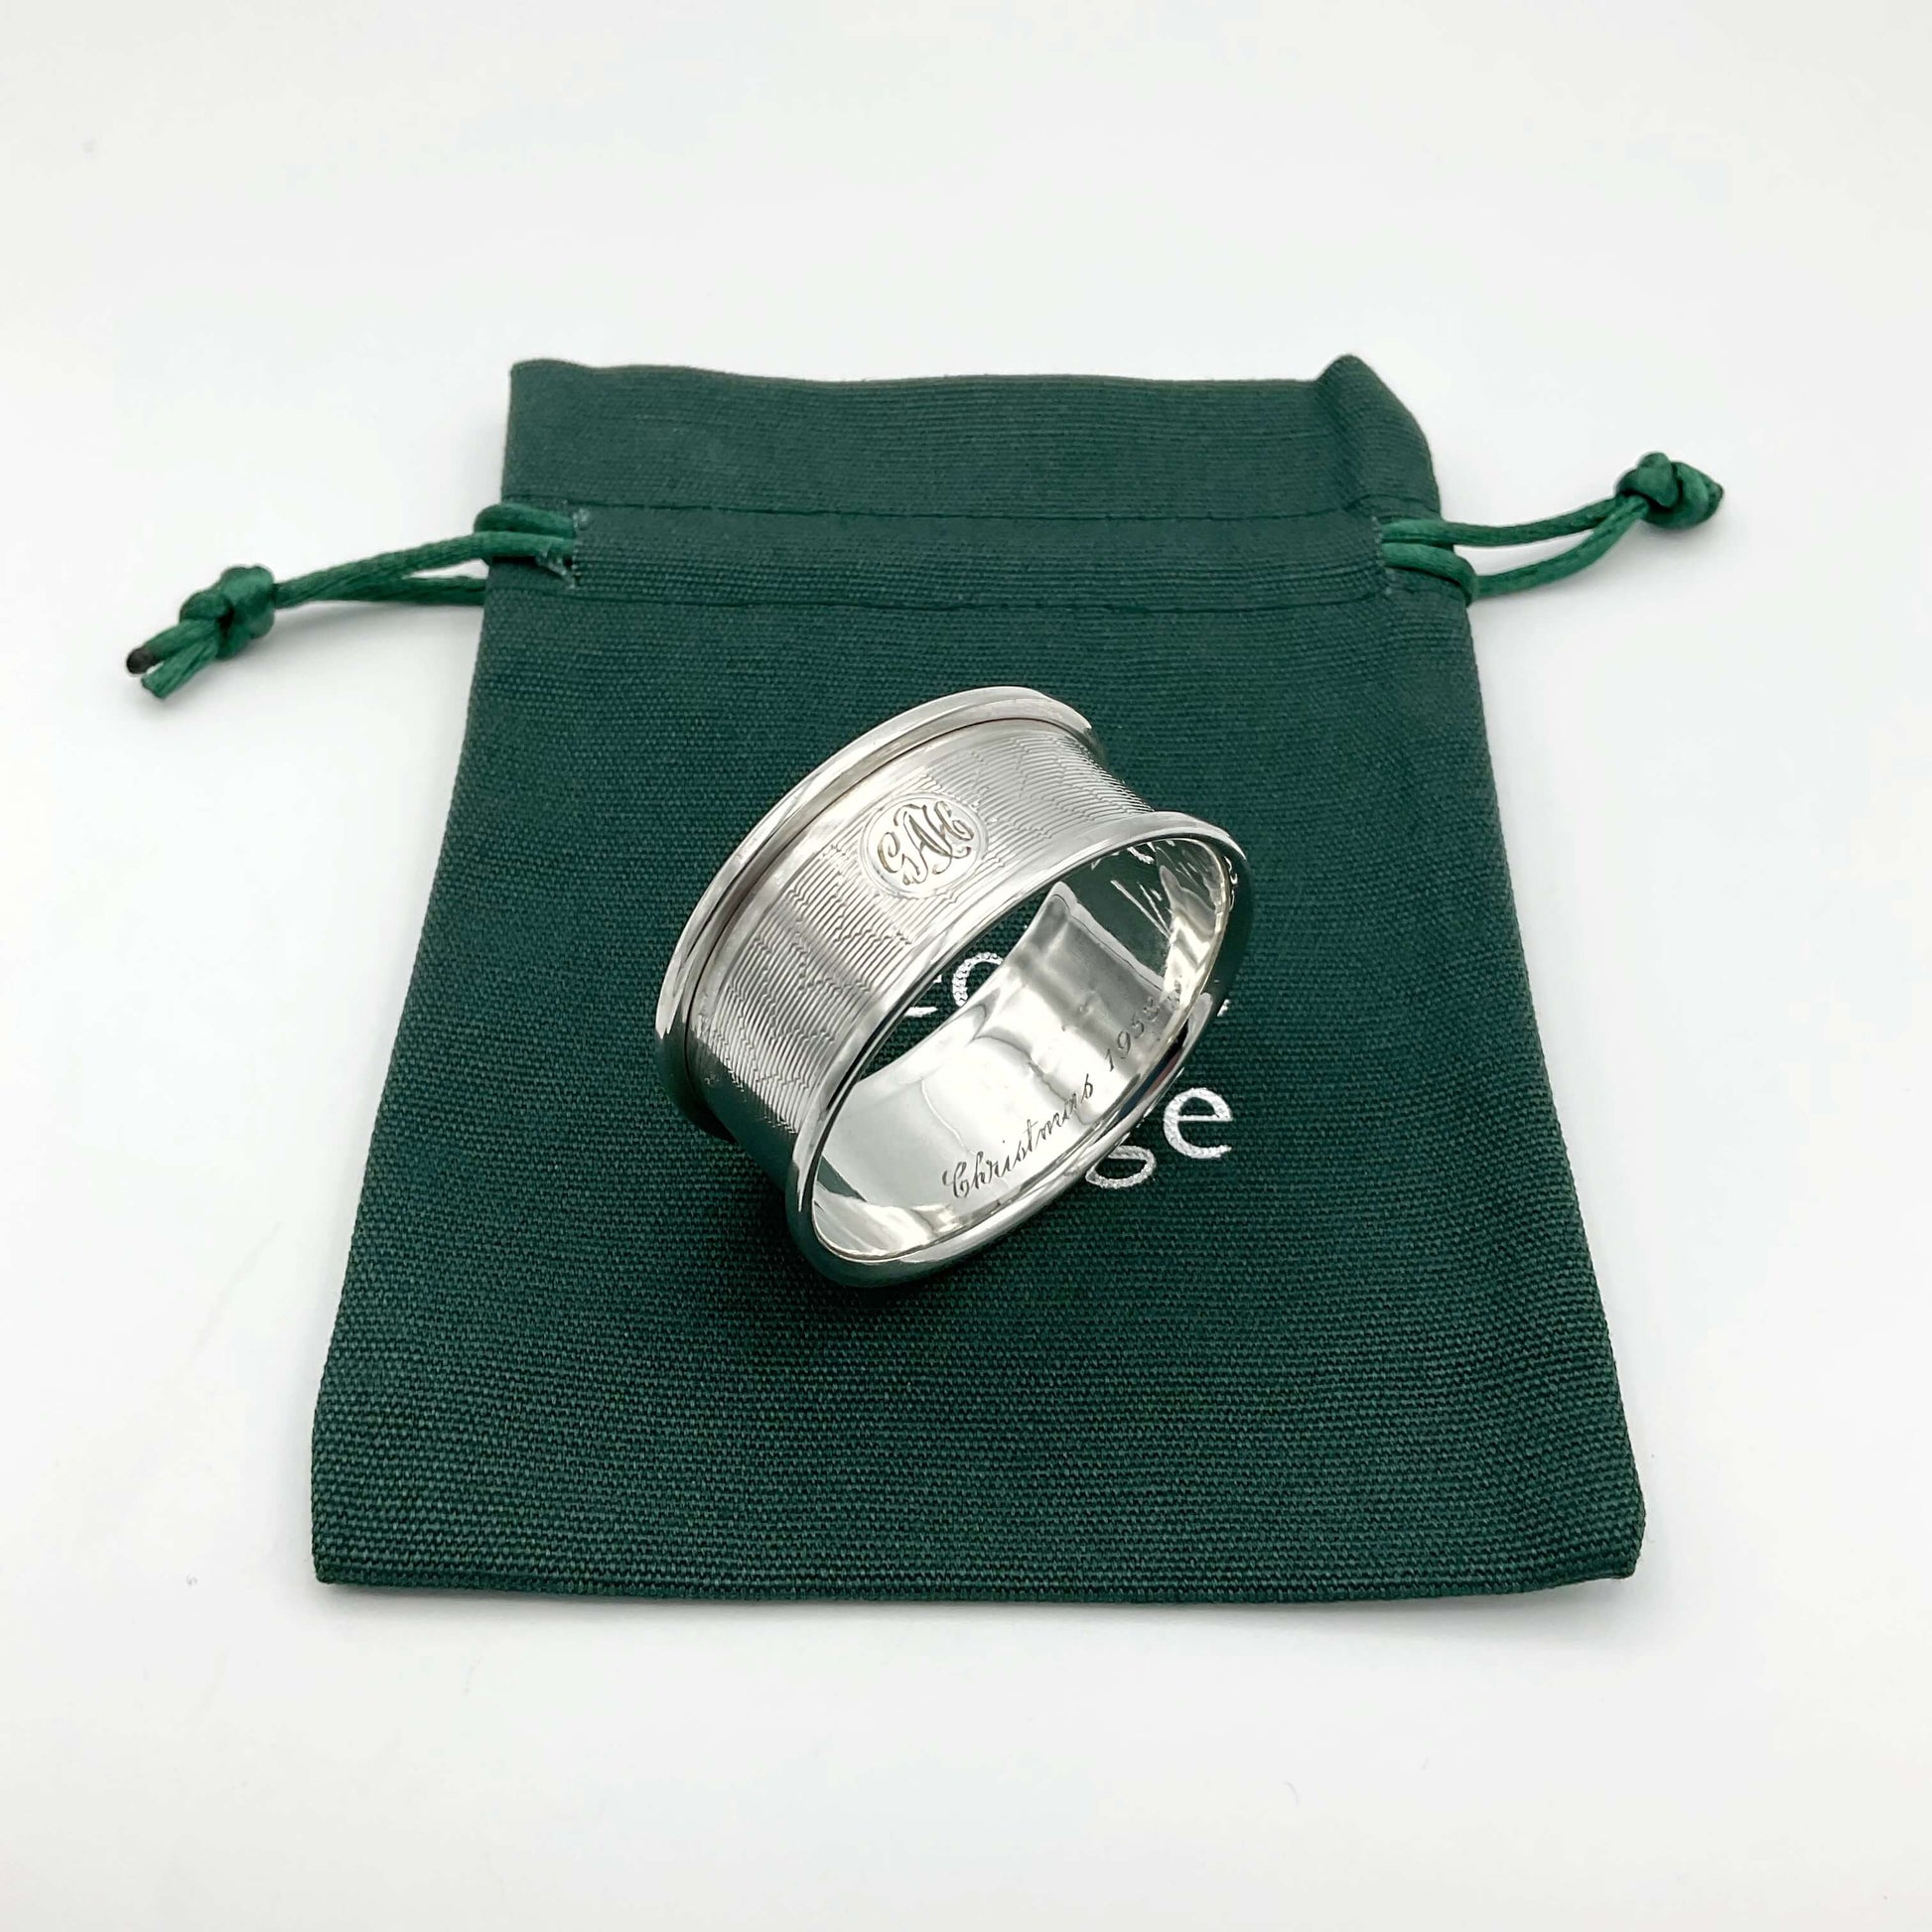 Silver napkin ring on a green gift bag